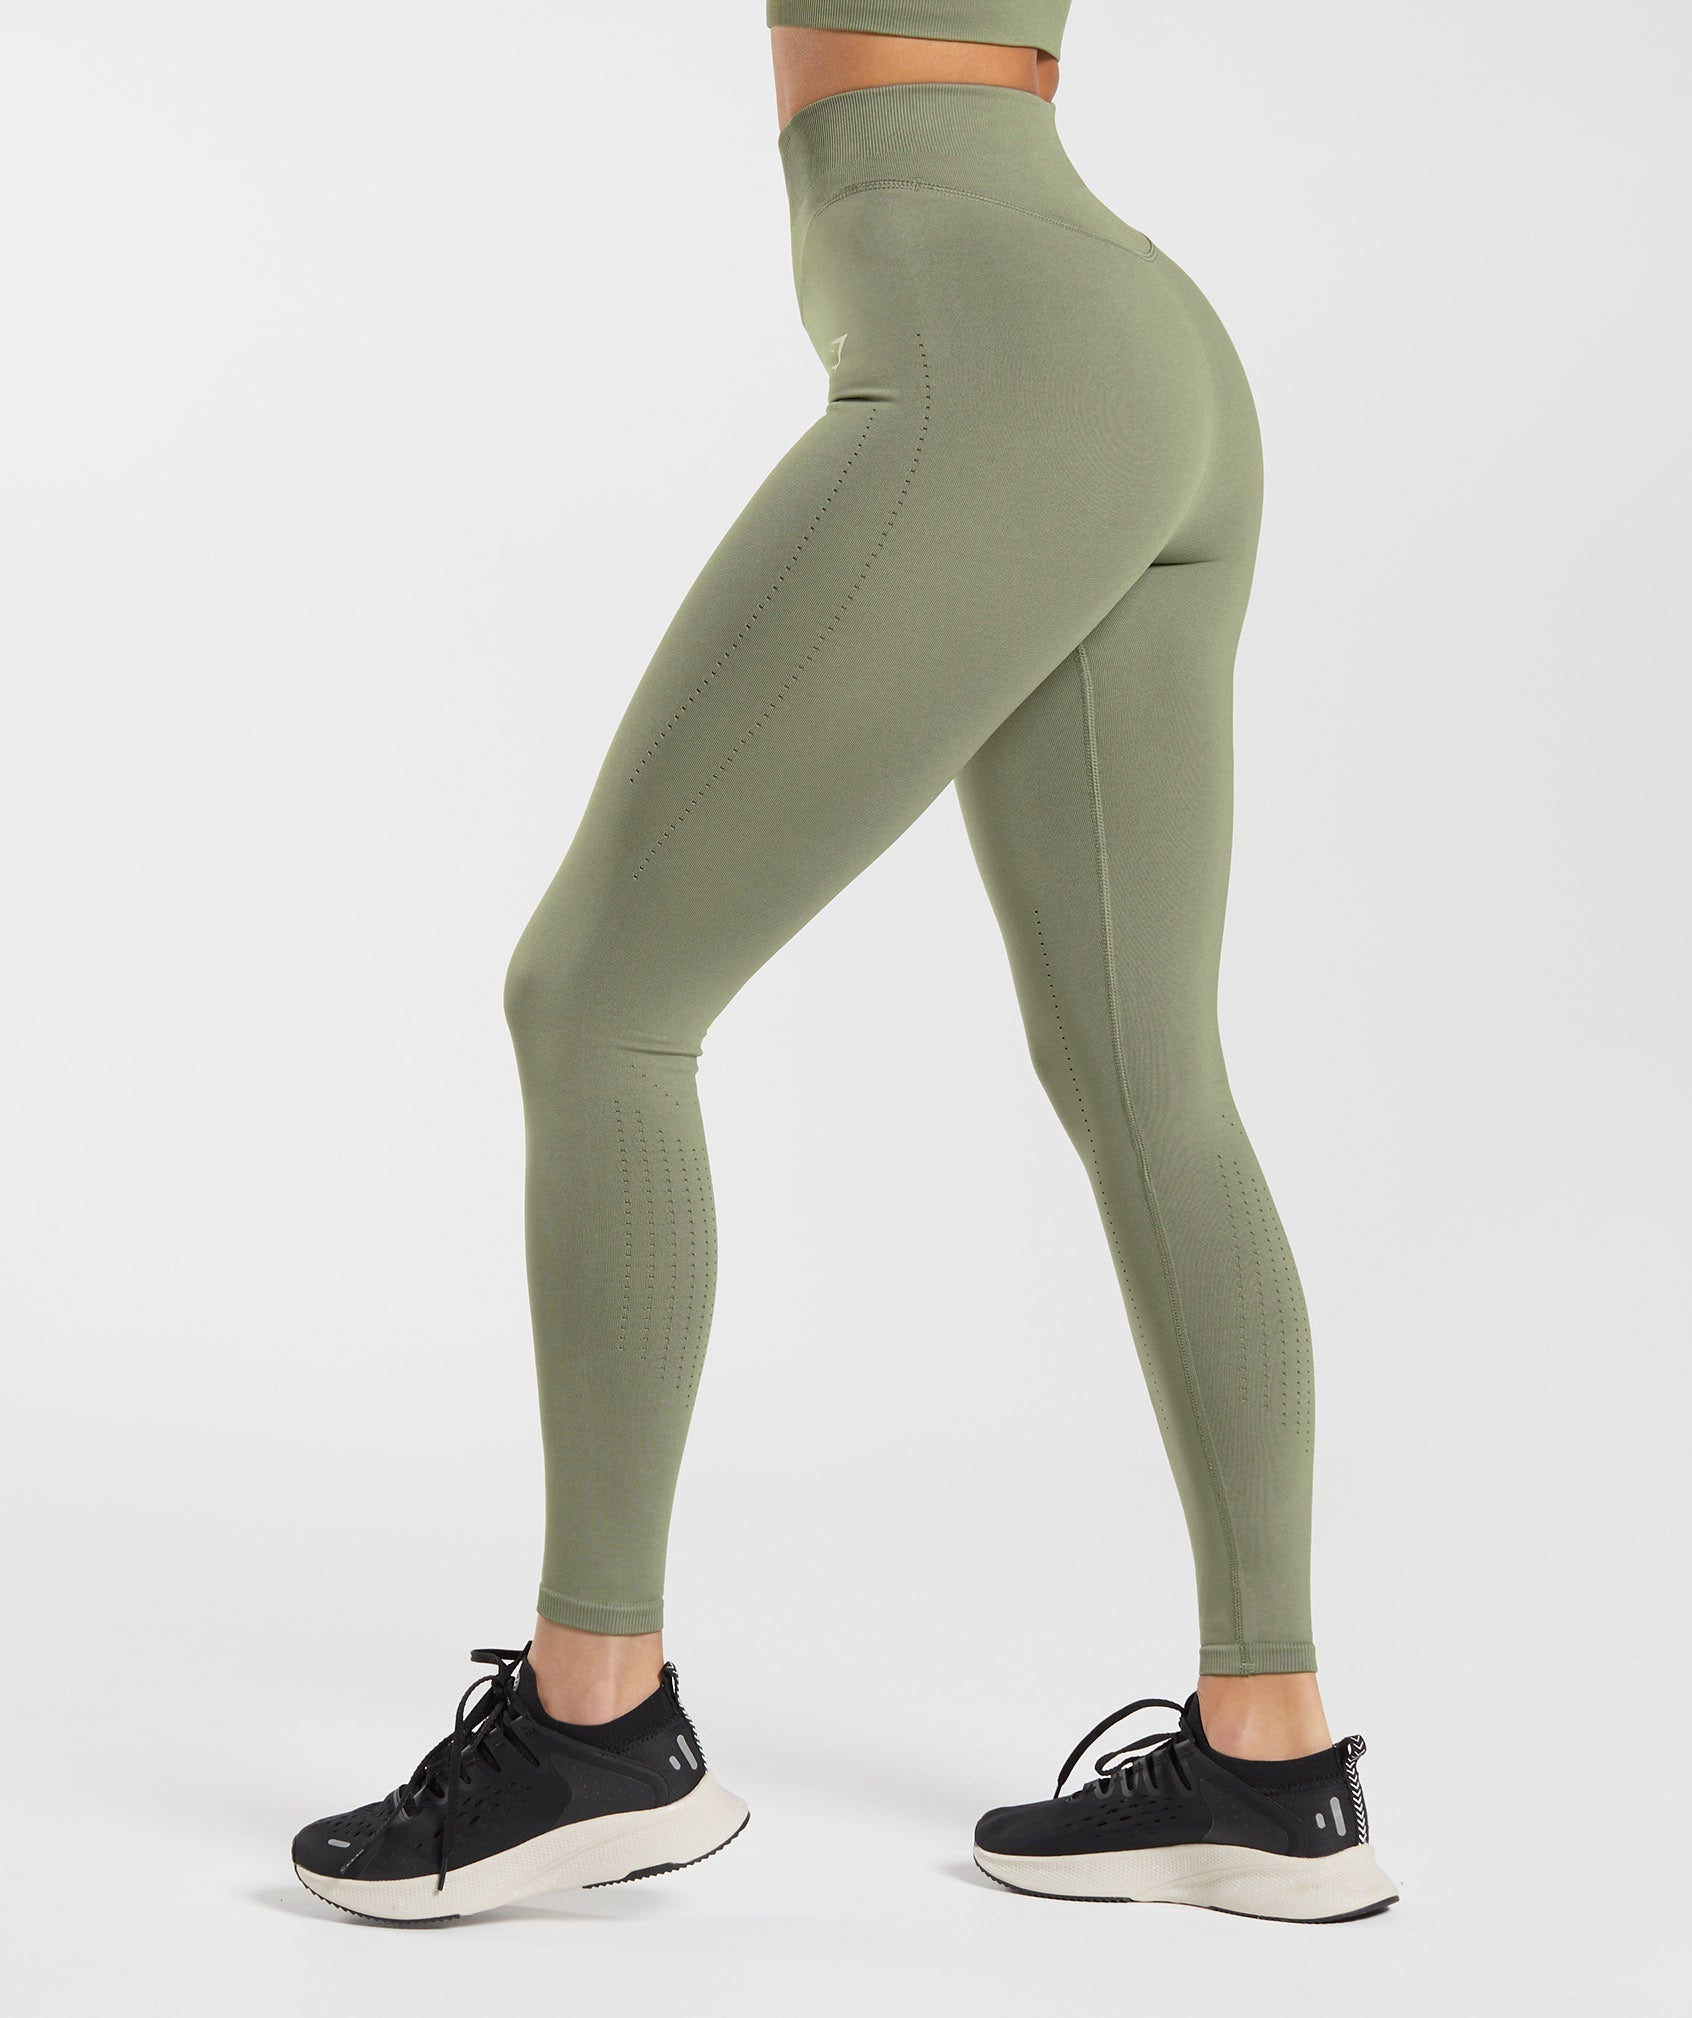 Gymshark Sweat Seamless Leggings Green - $19 (68% Off Retail) - From Ashley